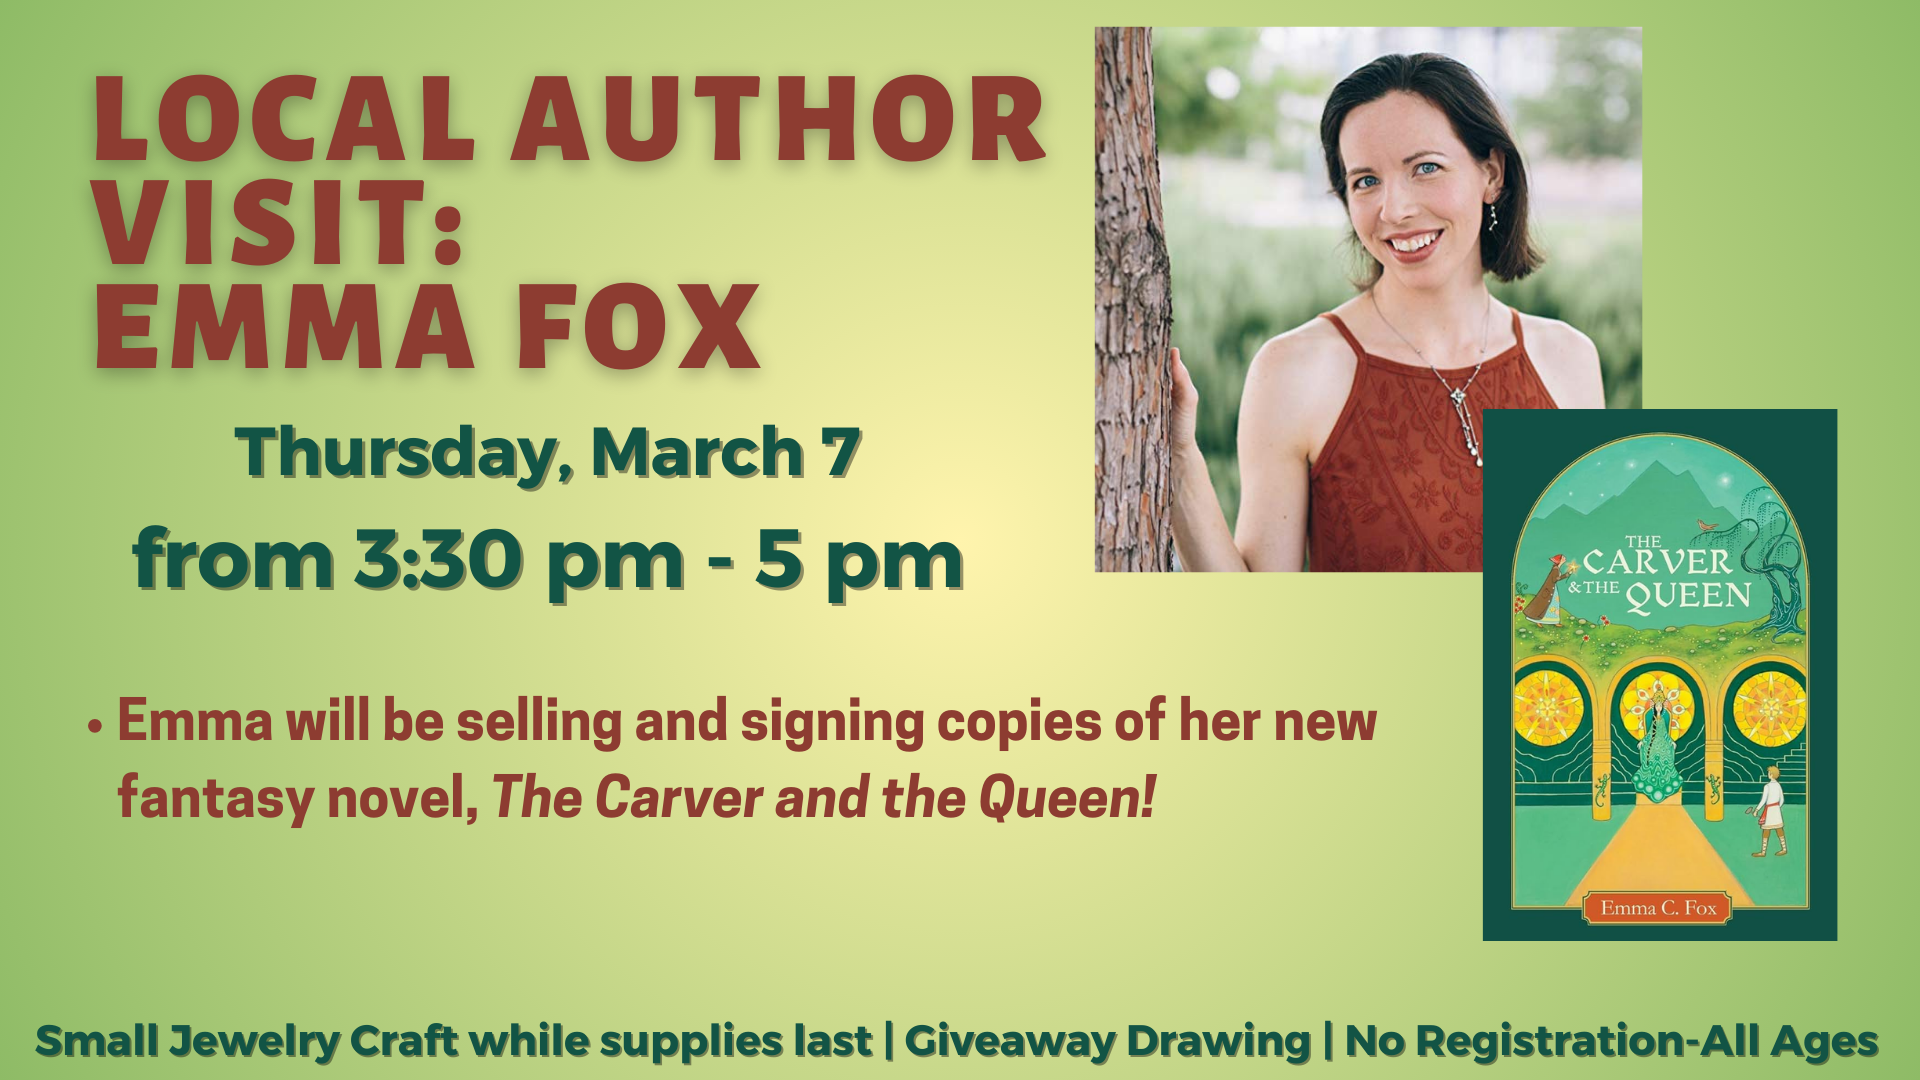 Graphic with a green background featuring a picture of local author Emma Fox and an image of the cover of her new book The Carver and the Queen. The text gives information about her visit to the library.